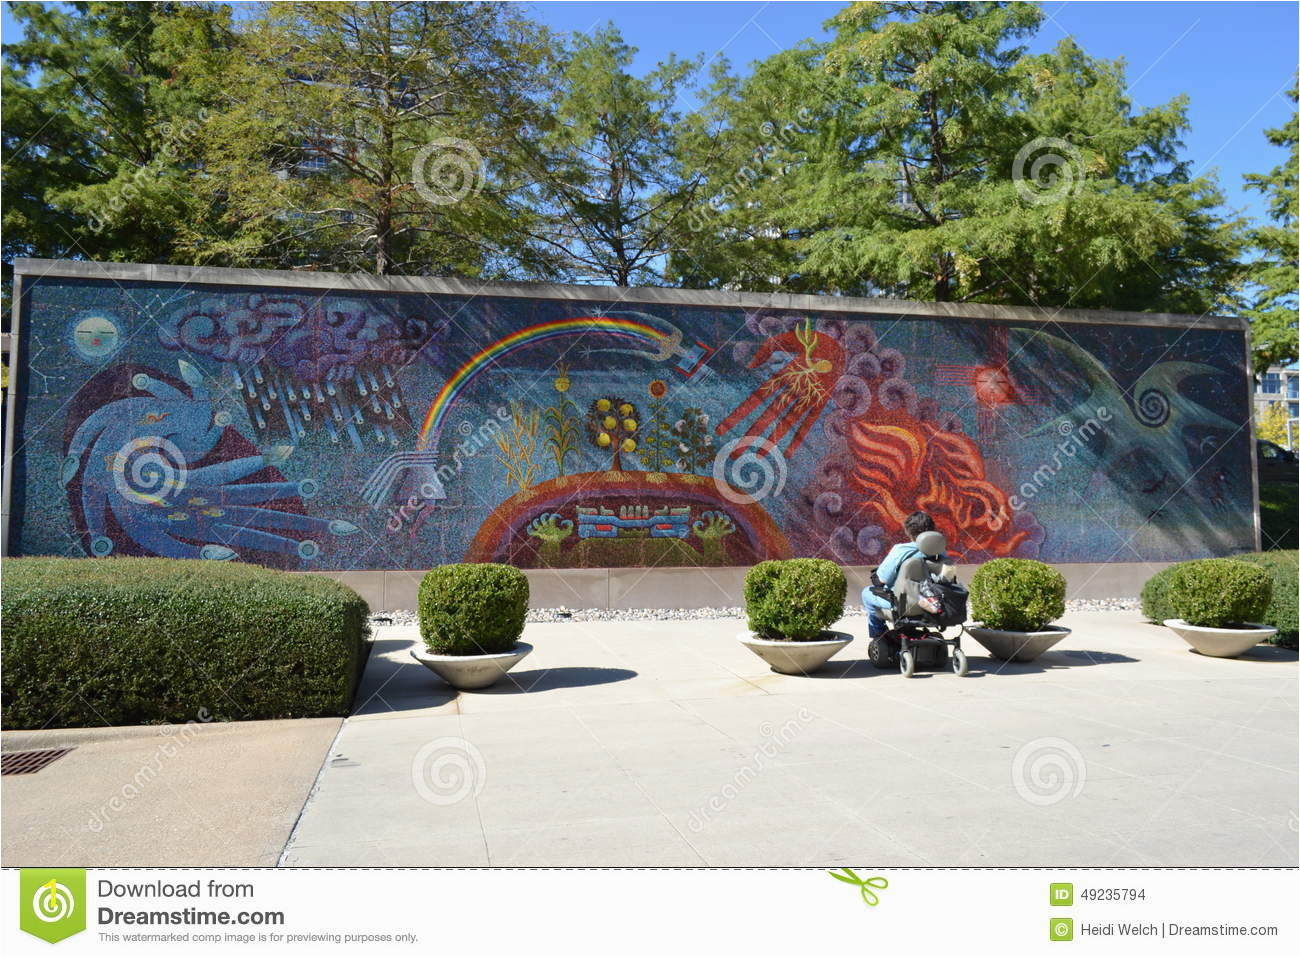 full wall mural looking painted outside dallas museum art one person wheelchair can be seen studying